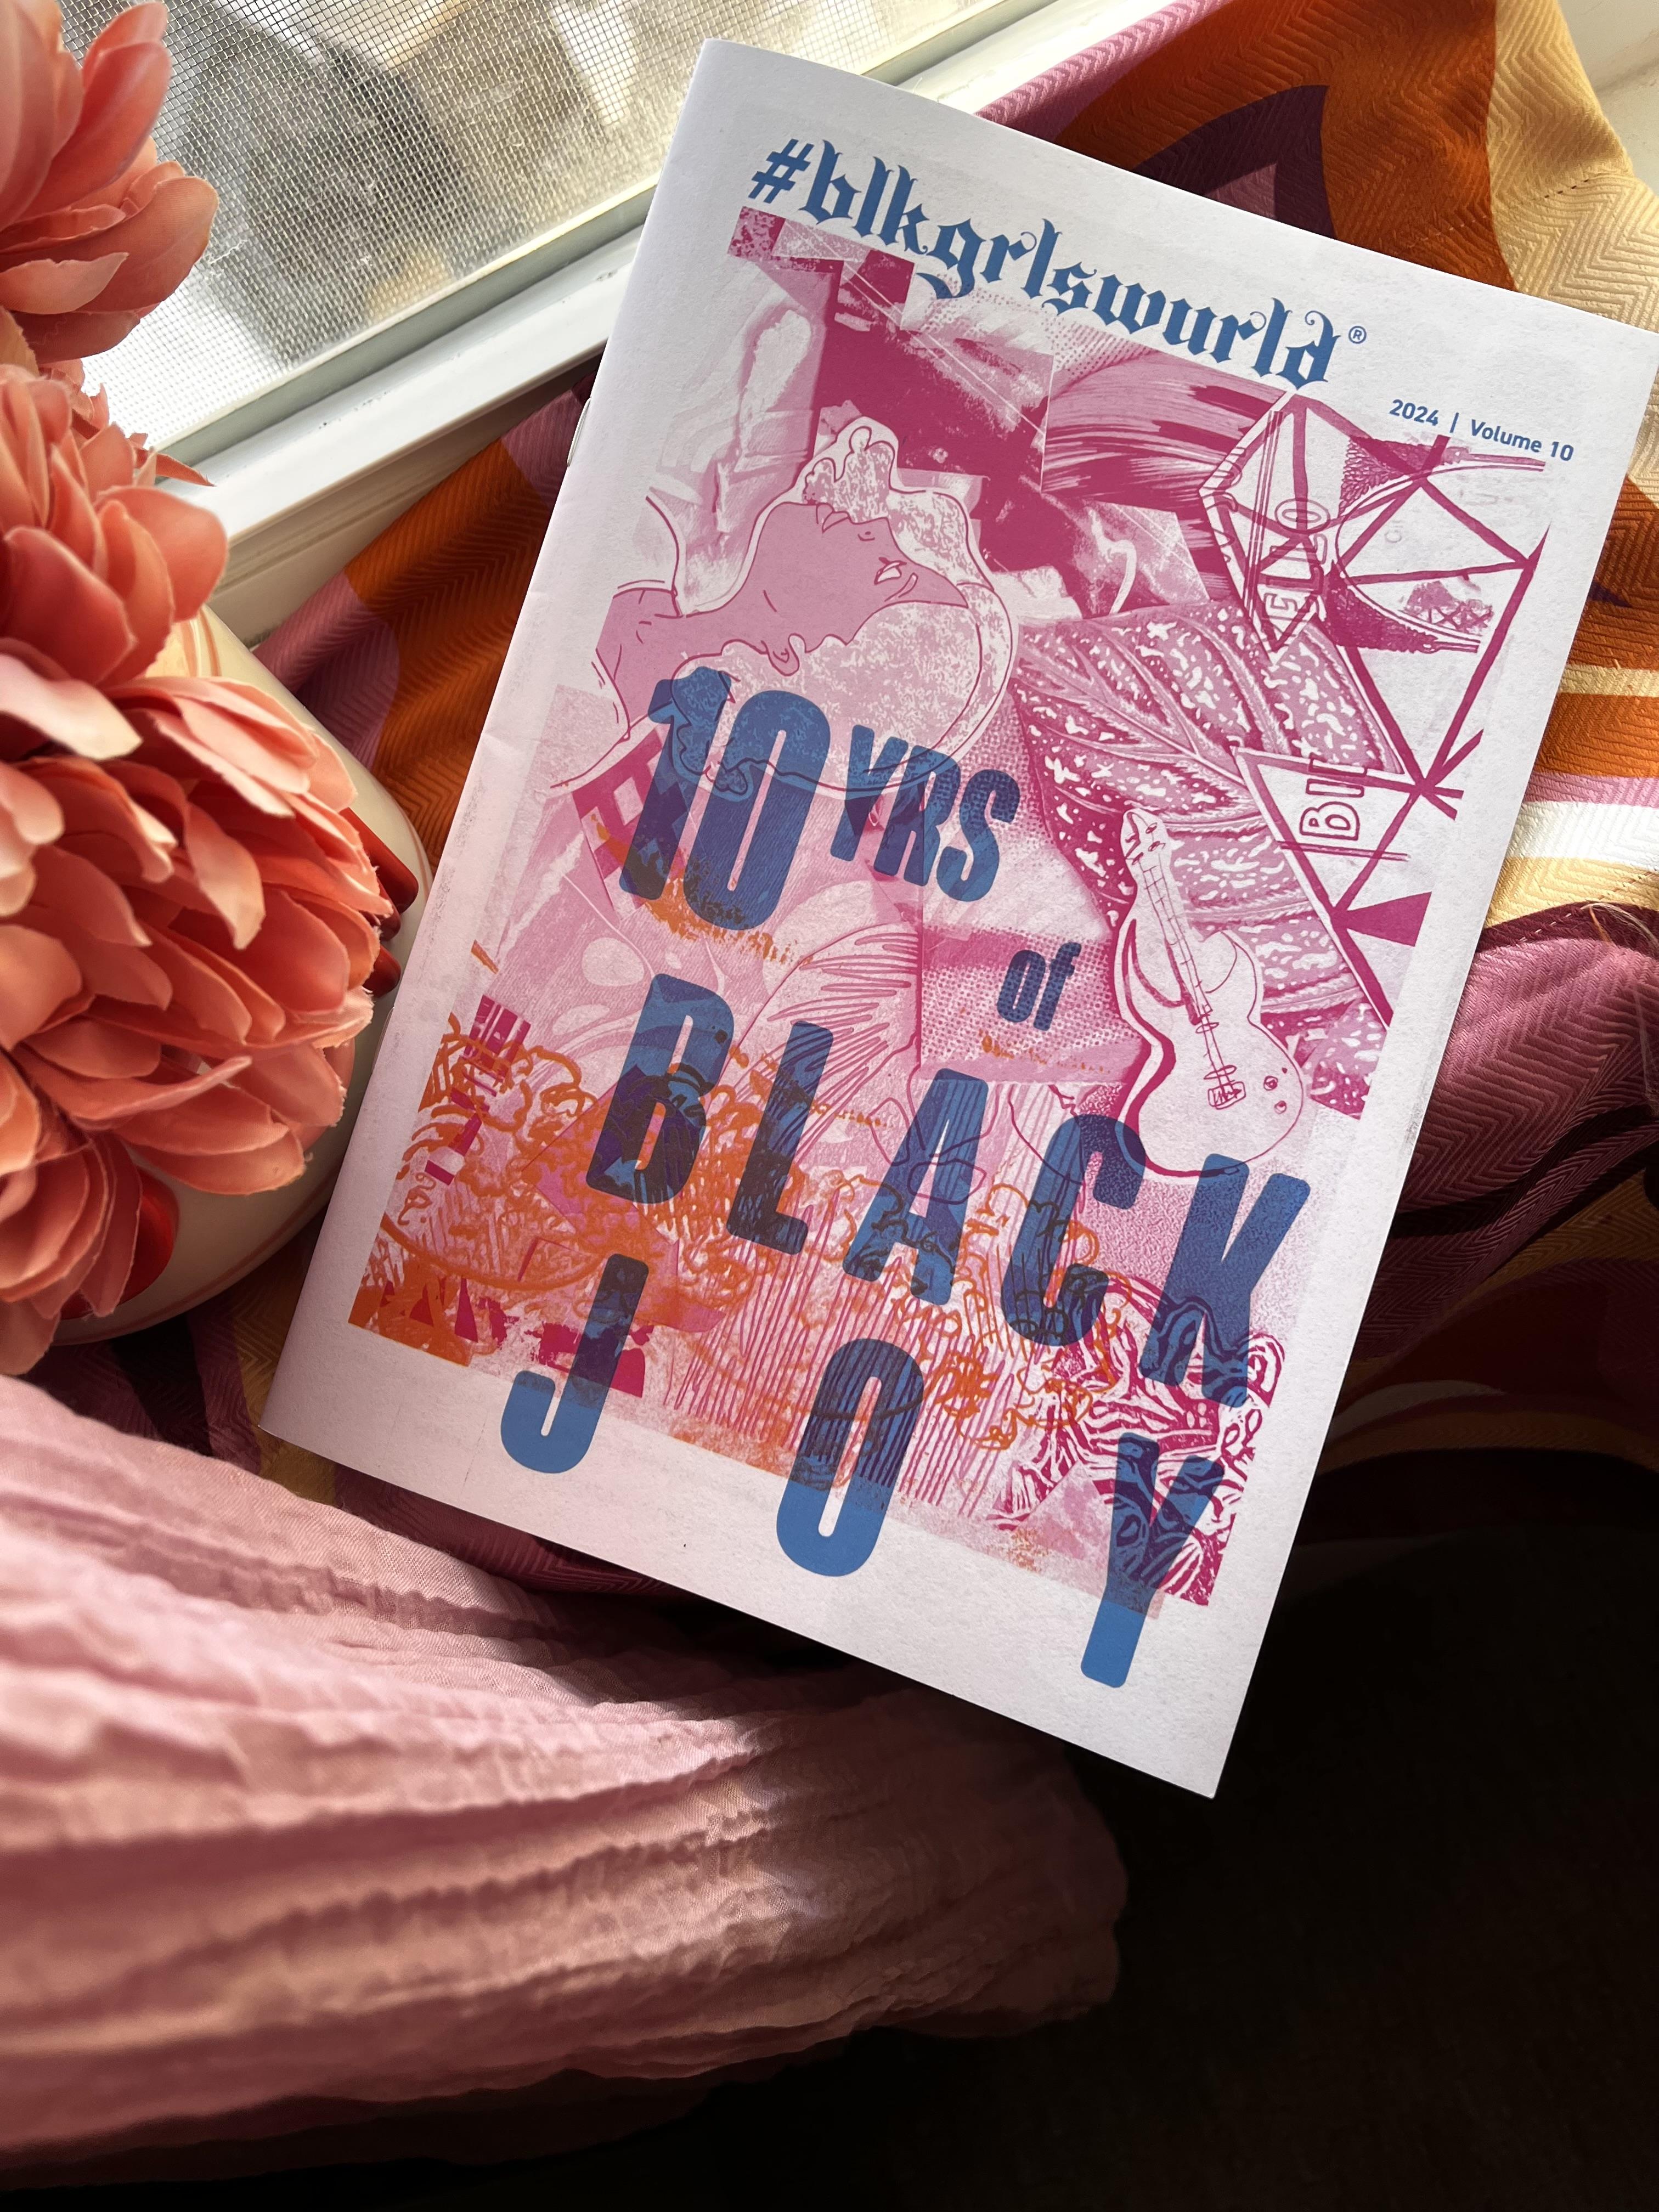 blkgrlswurld zine titled 10 yrs of Black Joy displayed on top of pink and salmon colored pillows near a window